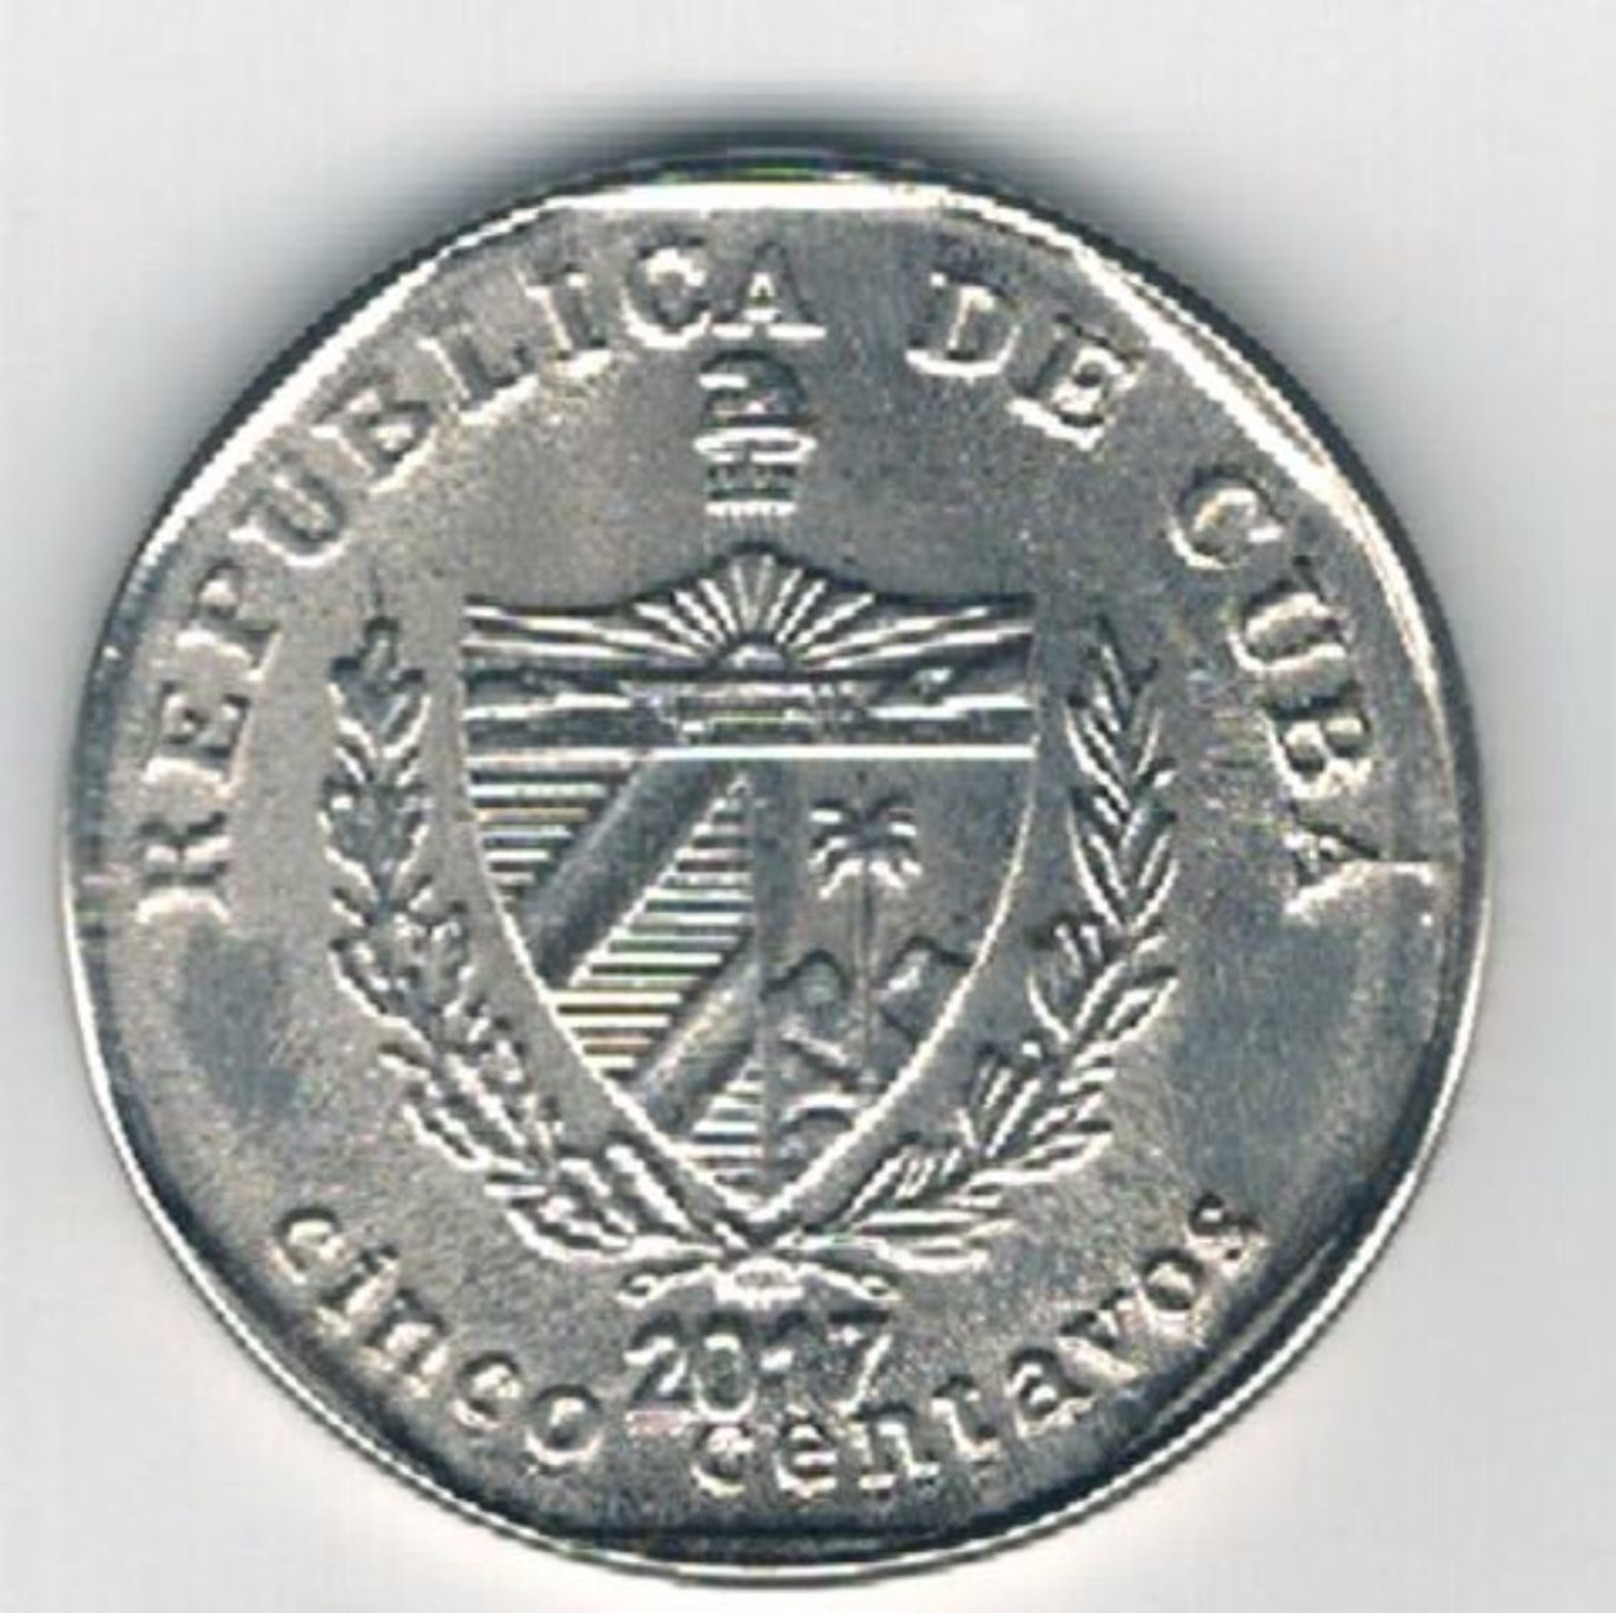 Cuba 5 Centavos  Convertibles 2017, AUNC/UNC, No Paypal For This Kind Of Item.  FREE SHIP. TO USA. - Cuba